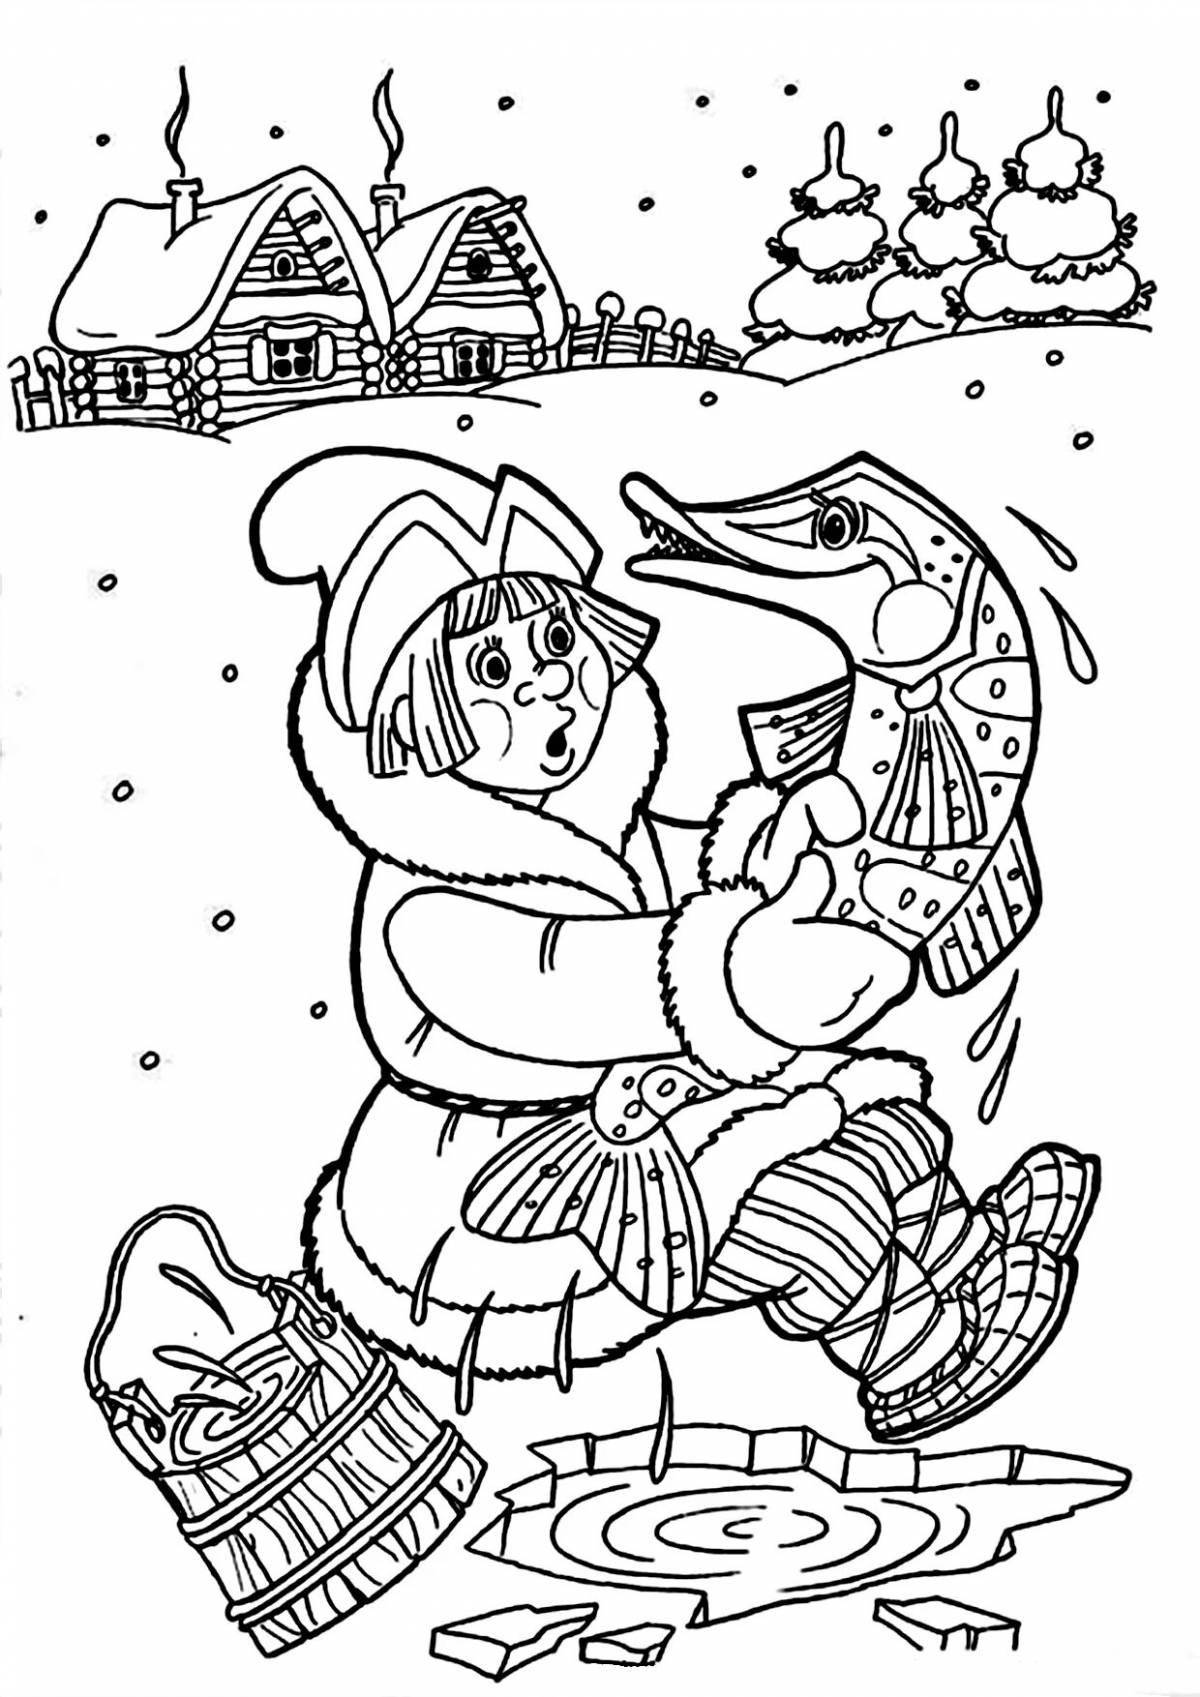 Fun coloring book for kids based on fairy tales